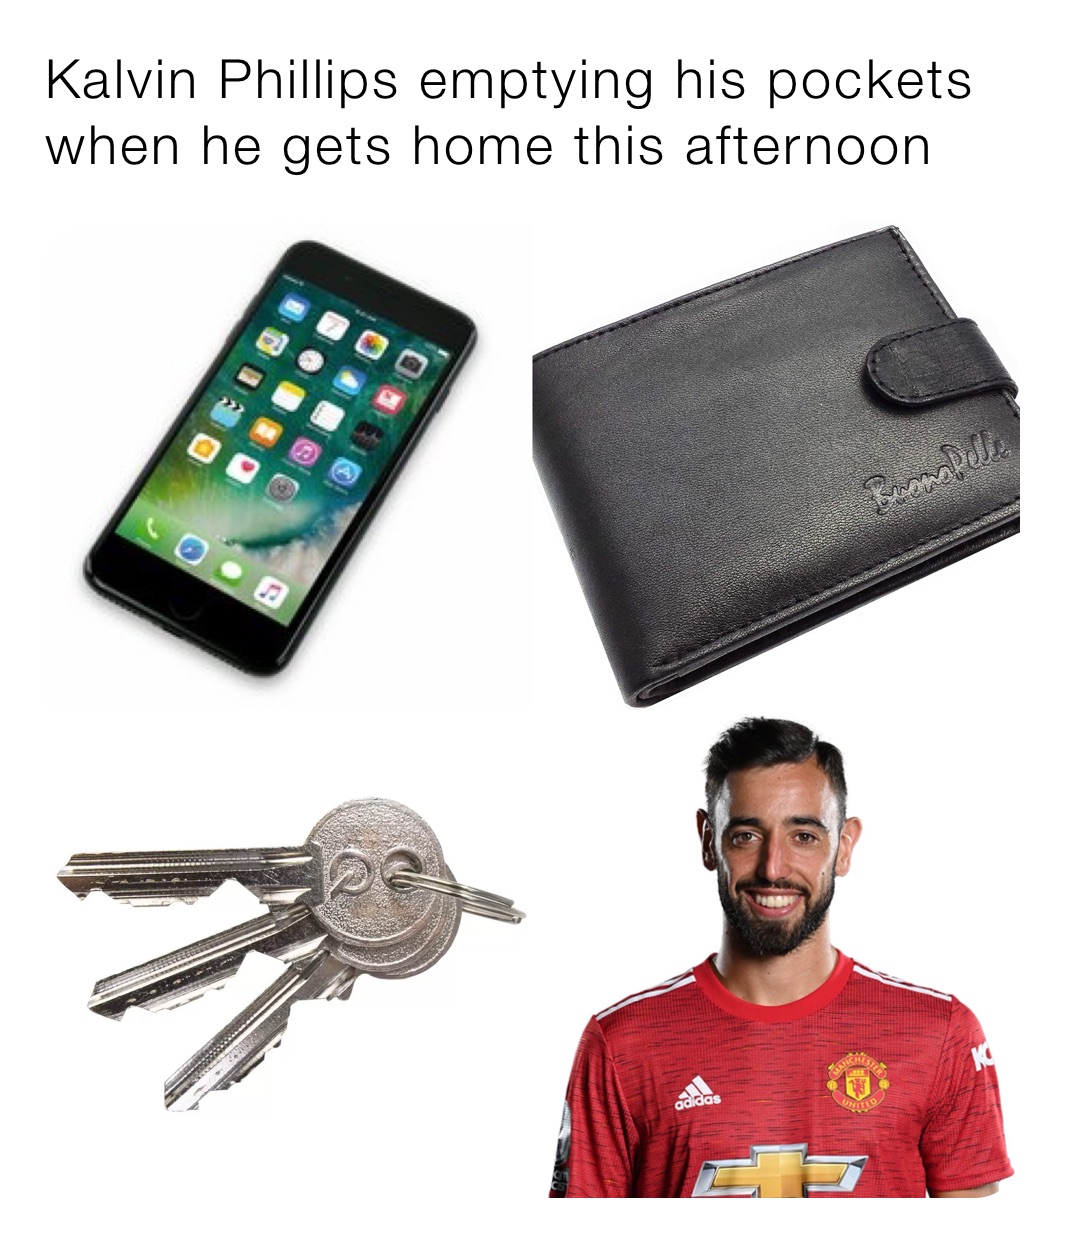 Kalvin Phillips emptying his pockets when he gets home this afternoon 